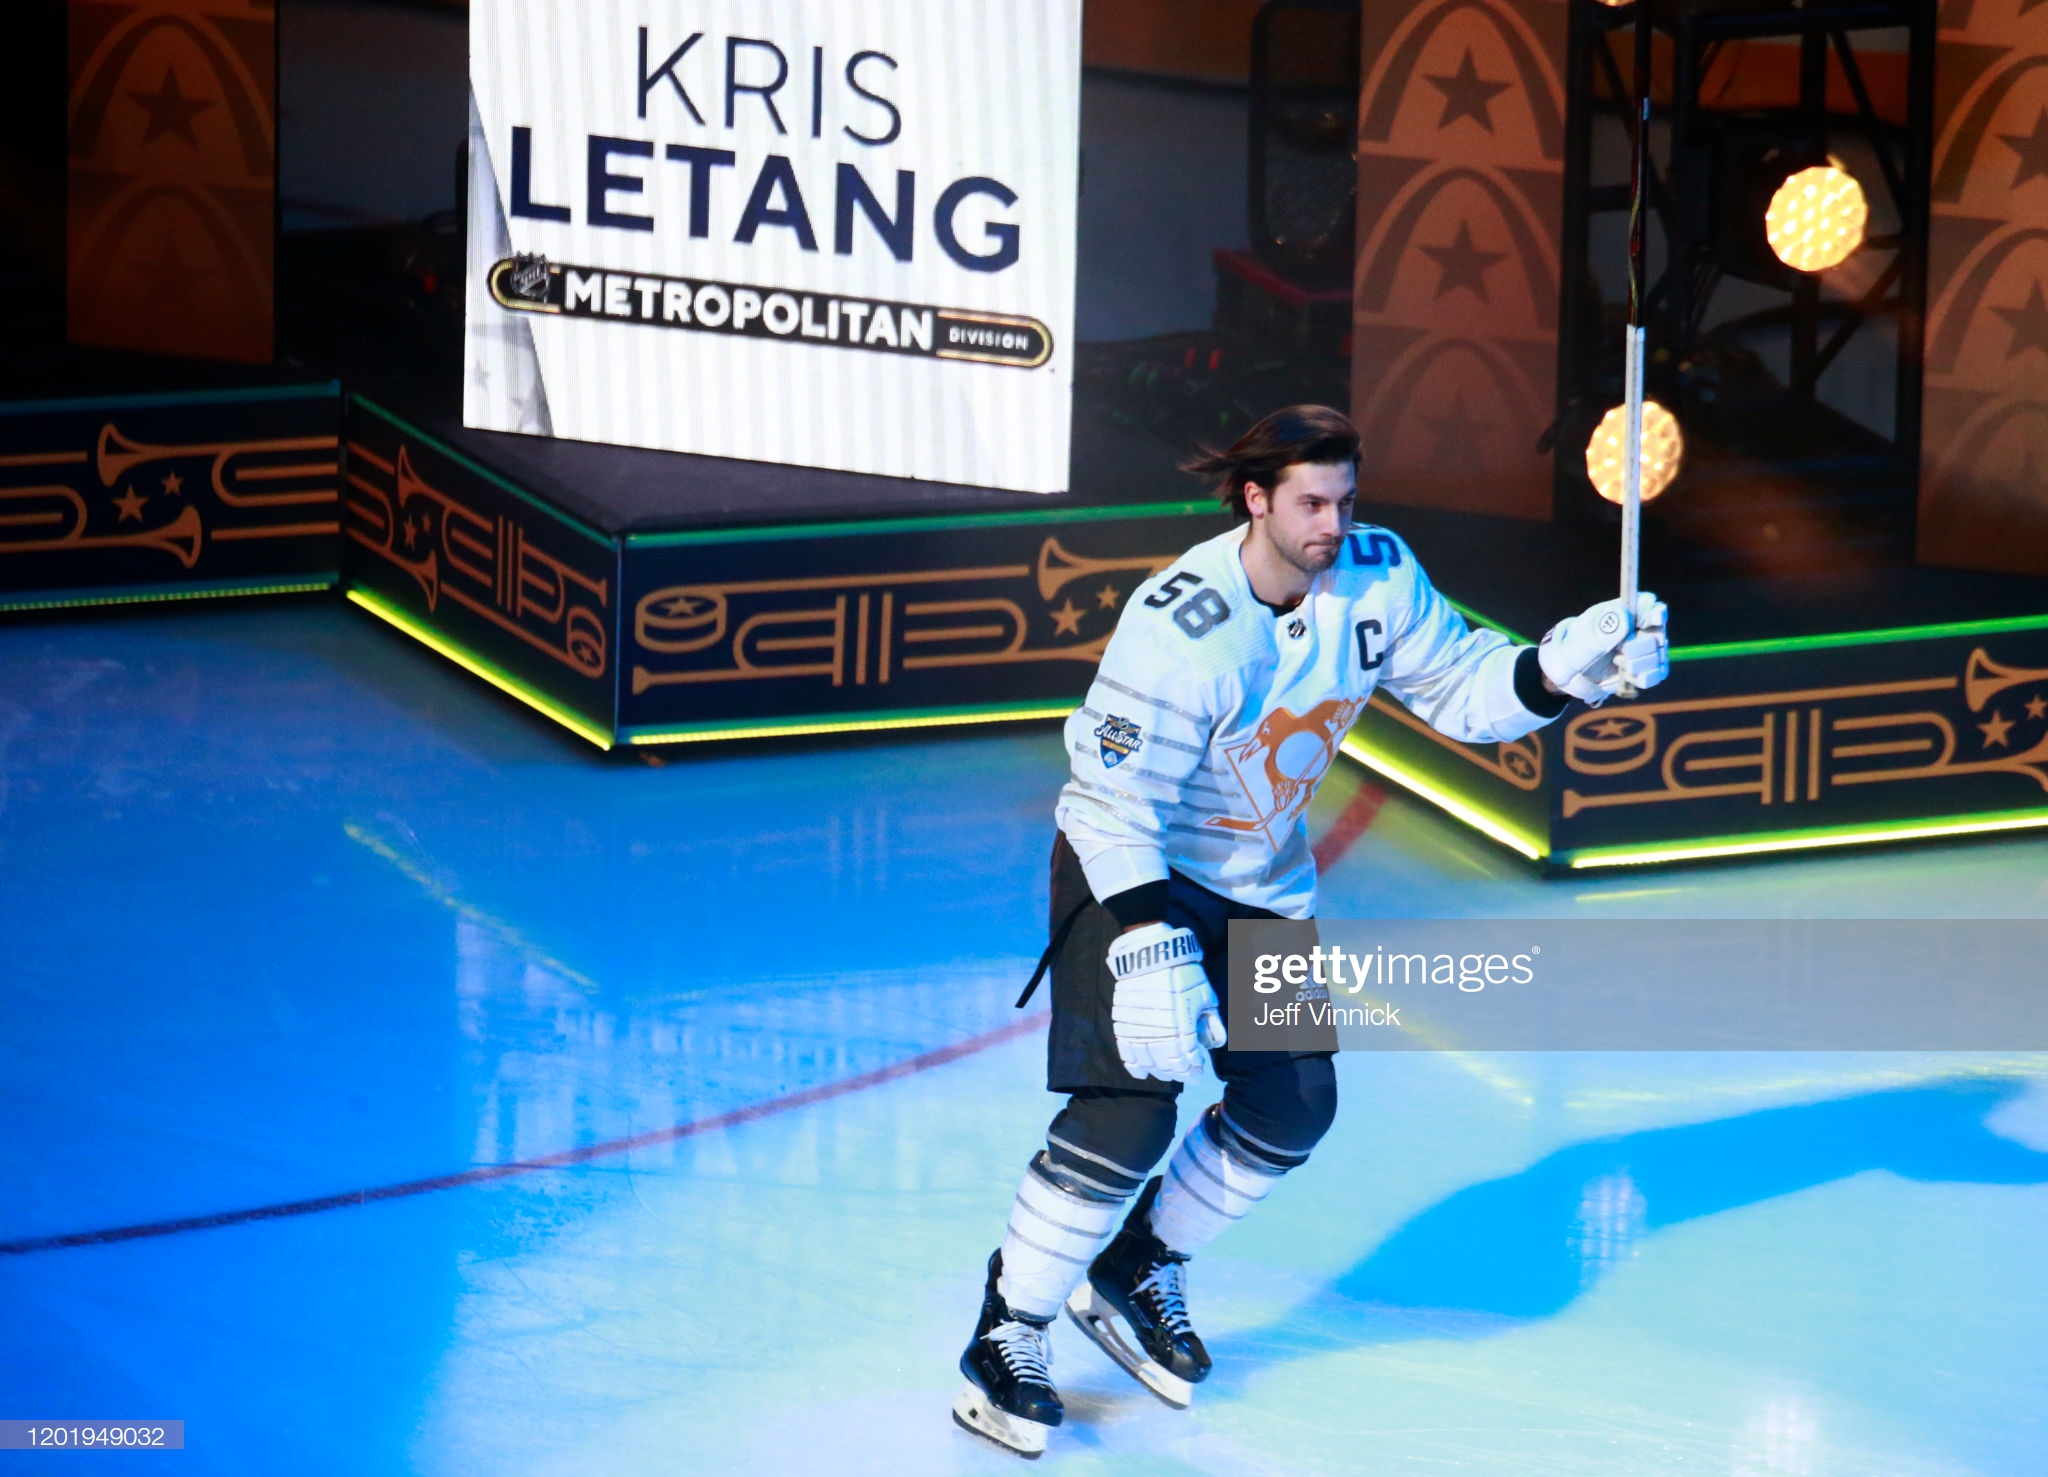 Kris Letang at the 2018 NHL All-Star Game – Pictures and Media